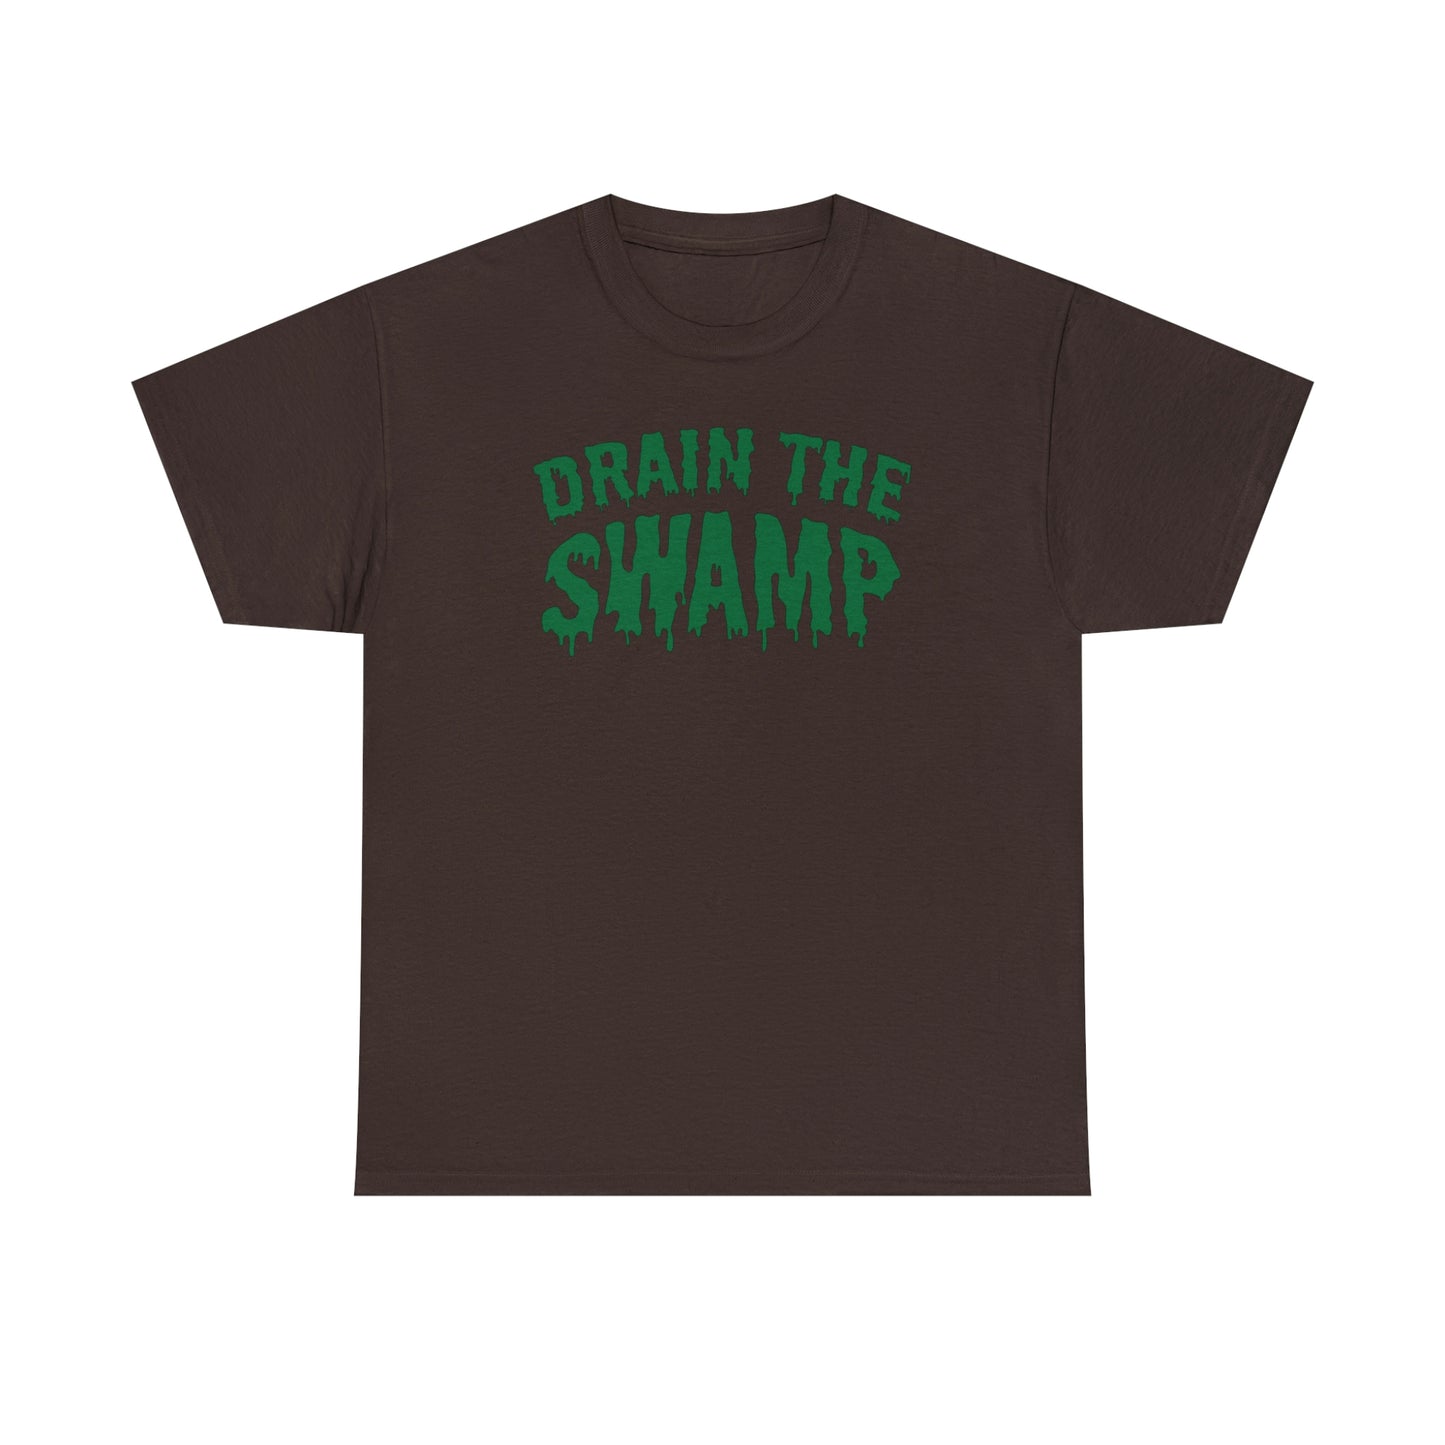 Drain The Swamp T-shirt For Conservative TShirt For Patriot Shirt Pro Trump T Shirt For American Anti Political Corruption Shirt